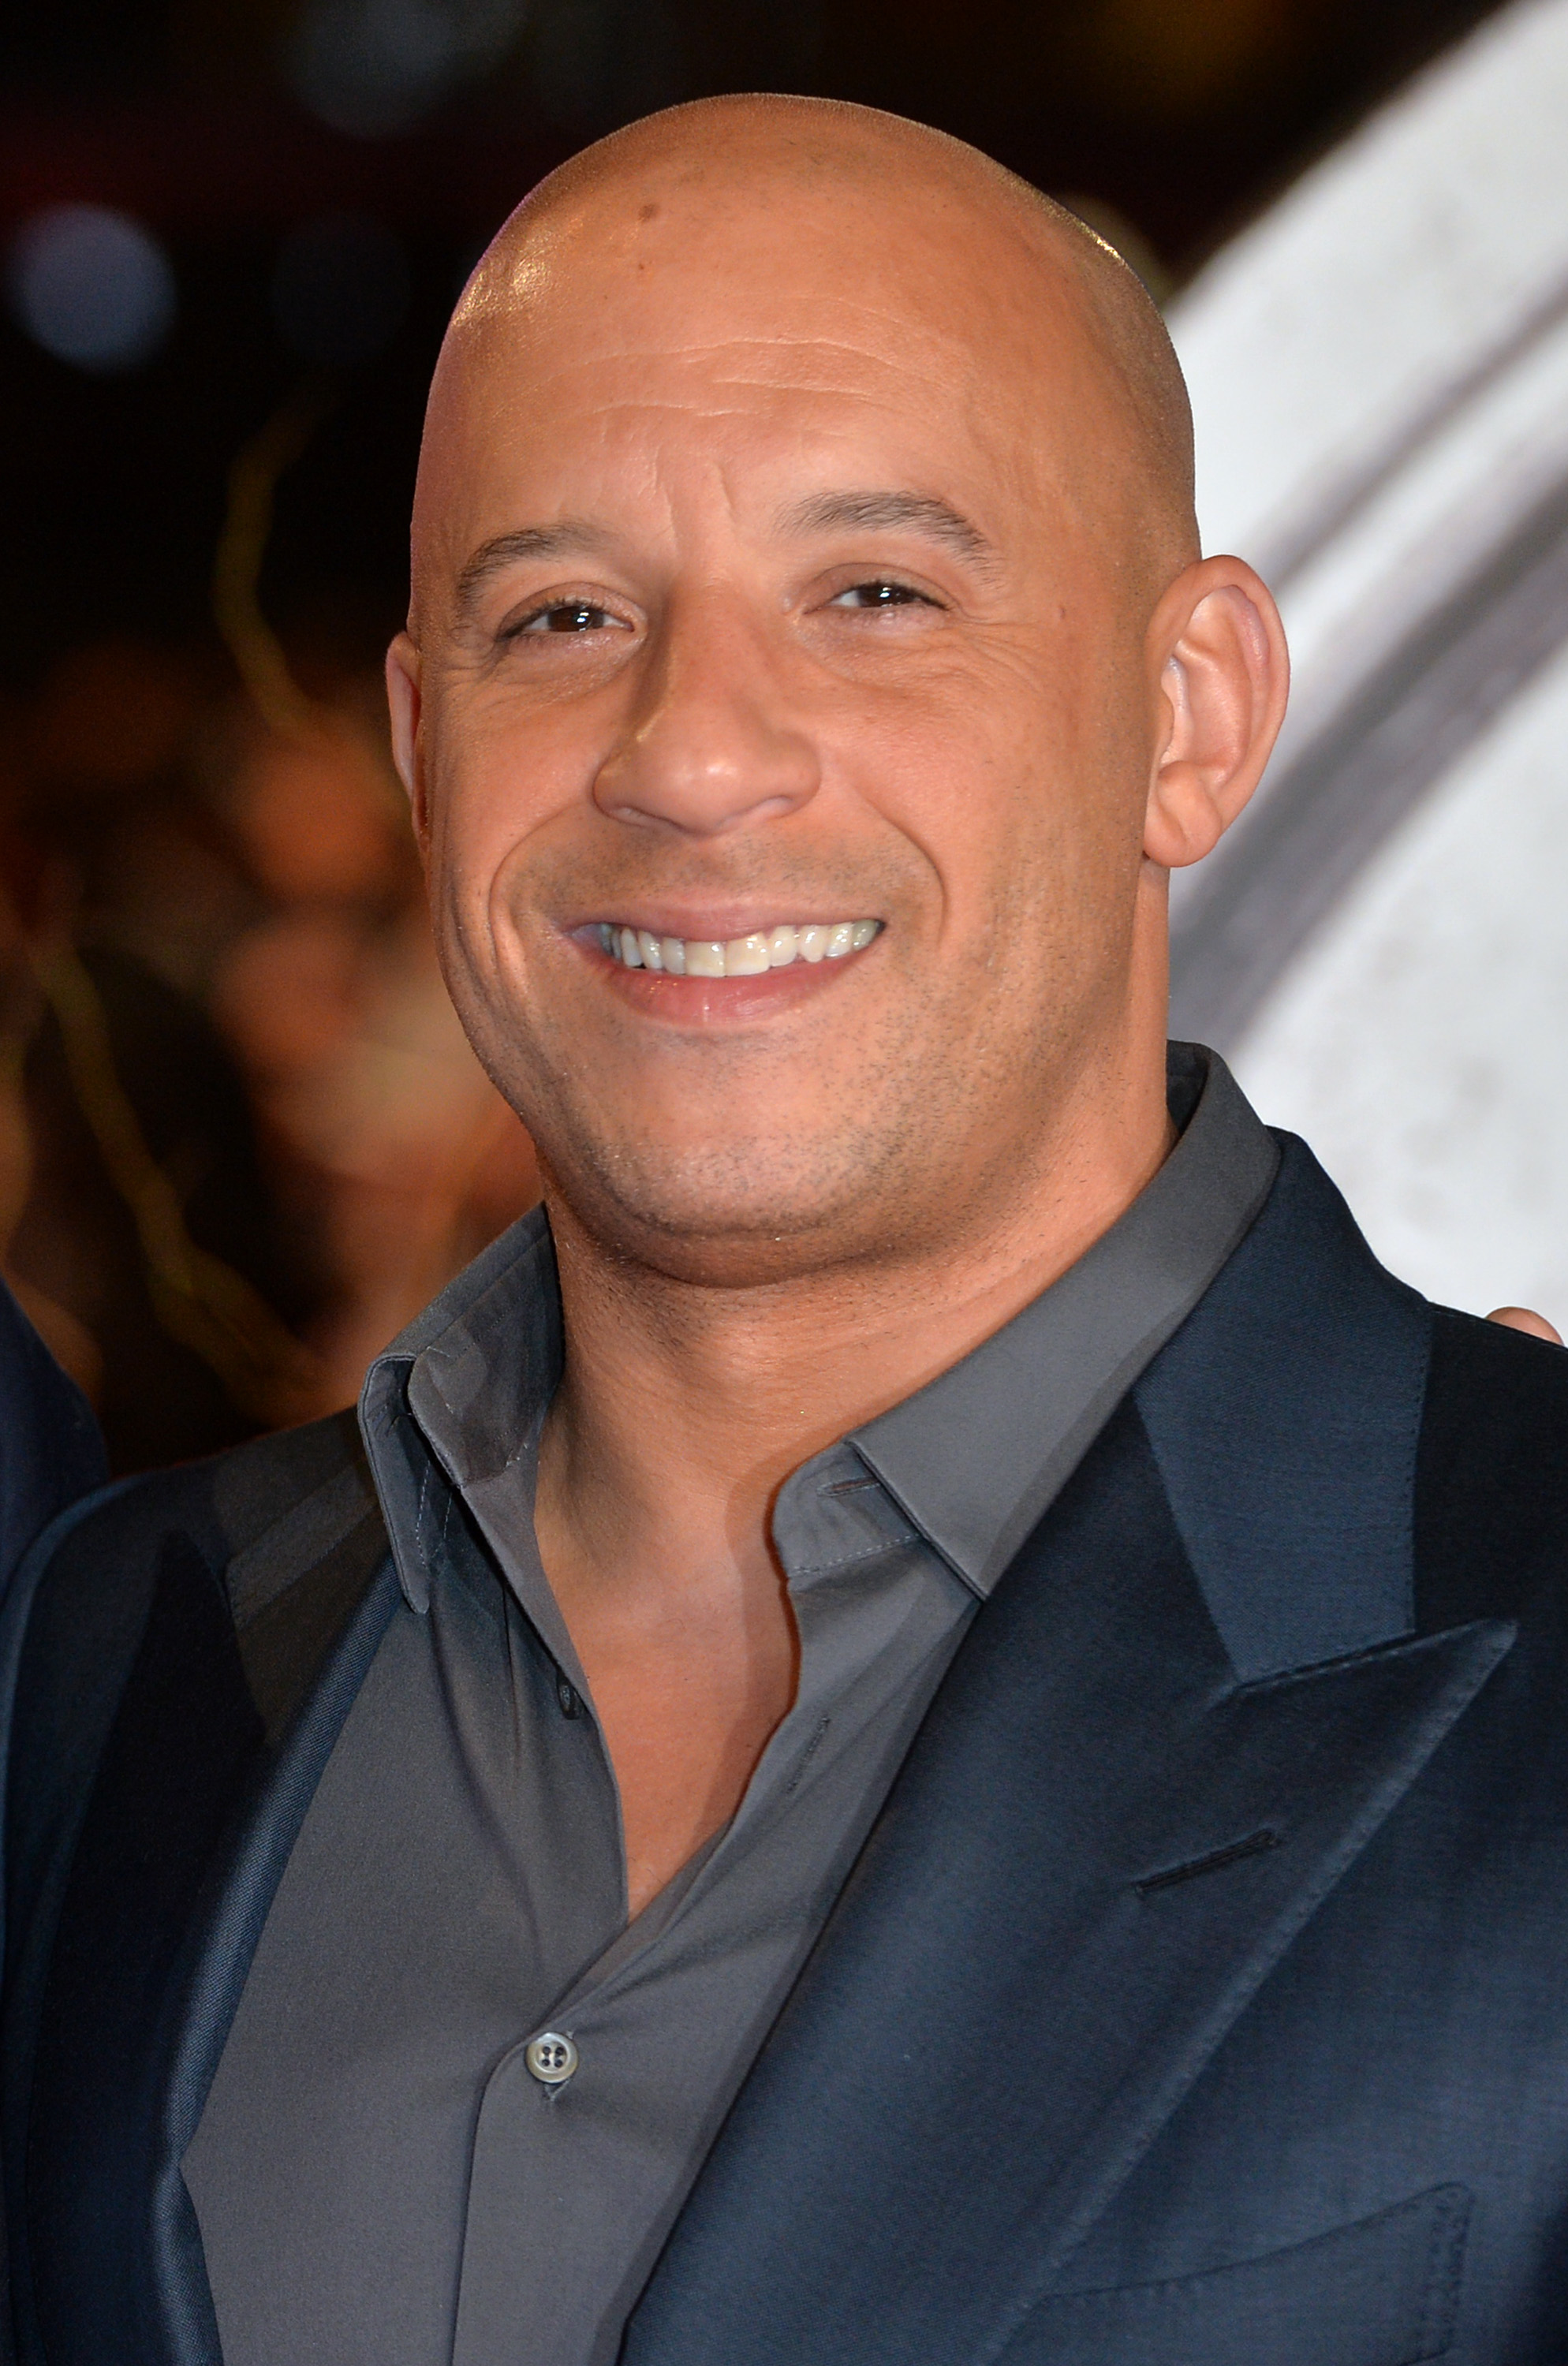 Vin Diesel attends the UK premiere of "The Last Witch Hunter" on October 19, 2015 in London, England | Source: Getty Images